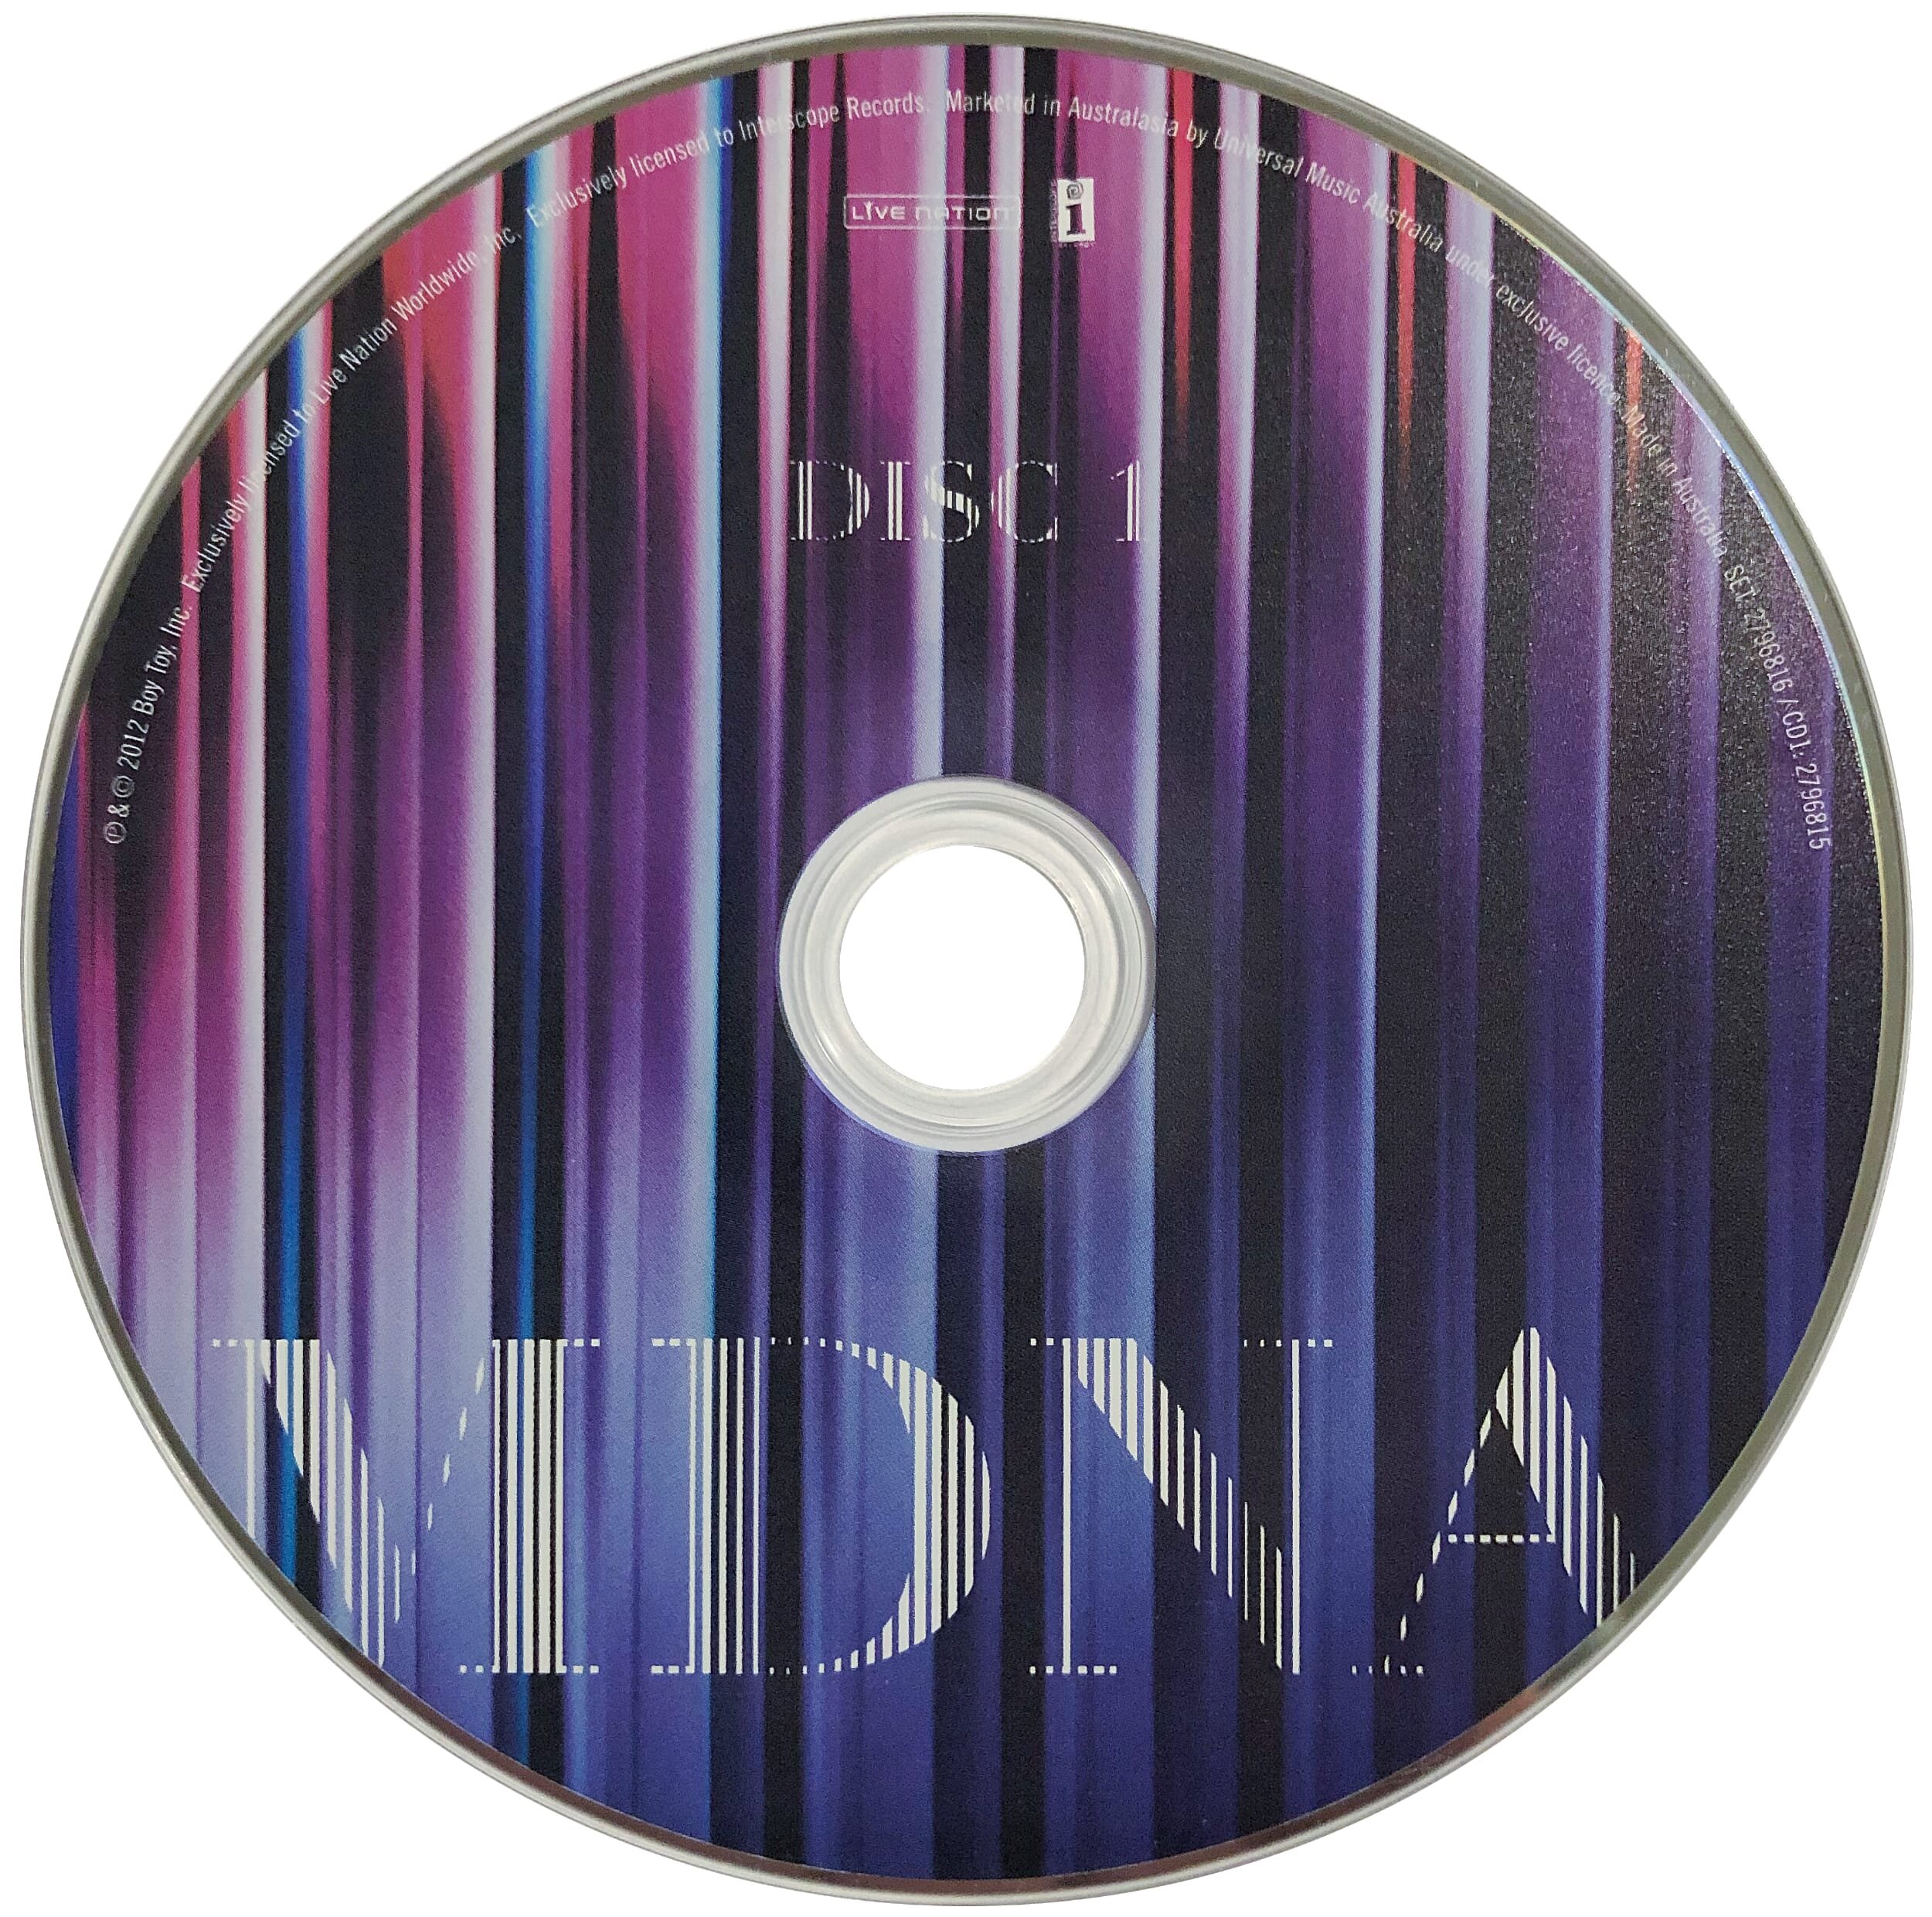 Madonna – MDNA Deluxe Edition (Album Review On Vinyl, CD, & Apple 